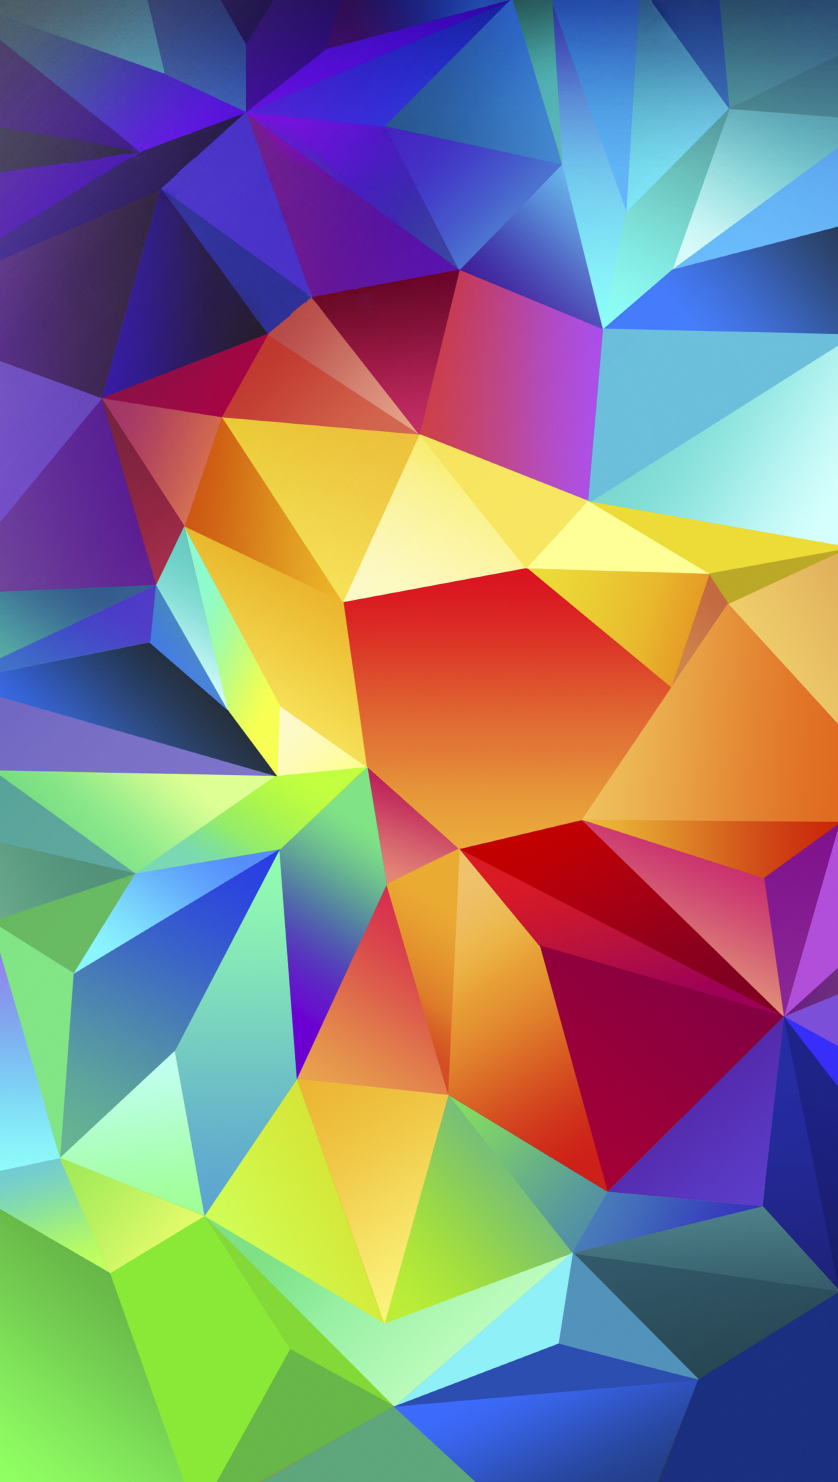 Get the Samsung Galaxy S5 look with these wallpapers AndroidGuys 838x1482